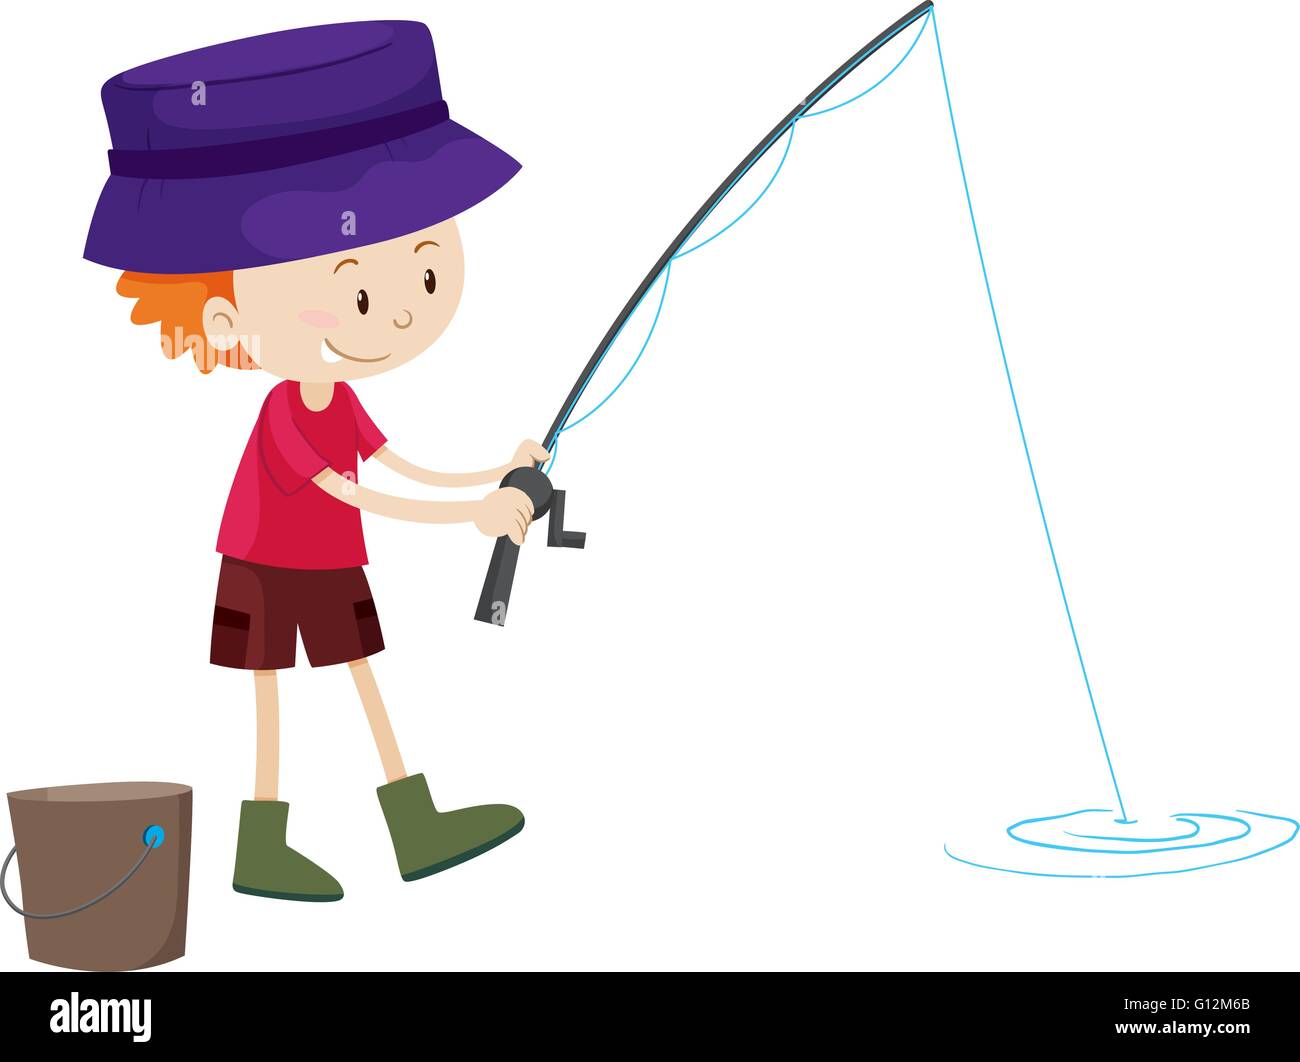 Clip art fishing hi-res stock photography and images - Page 6 - Alamy